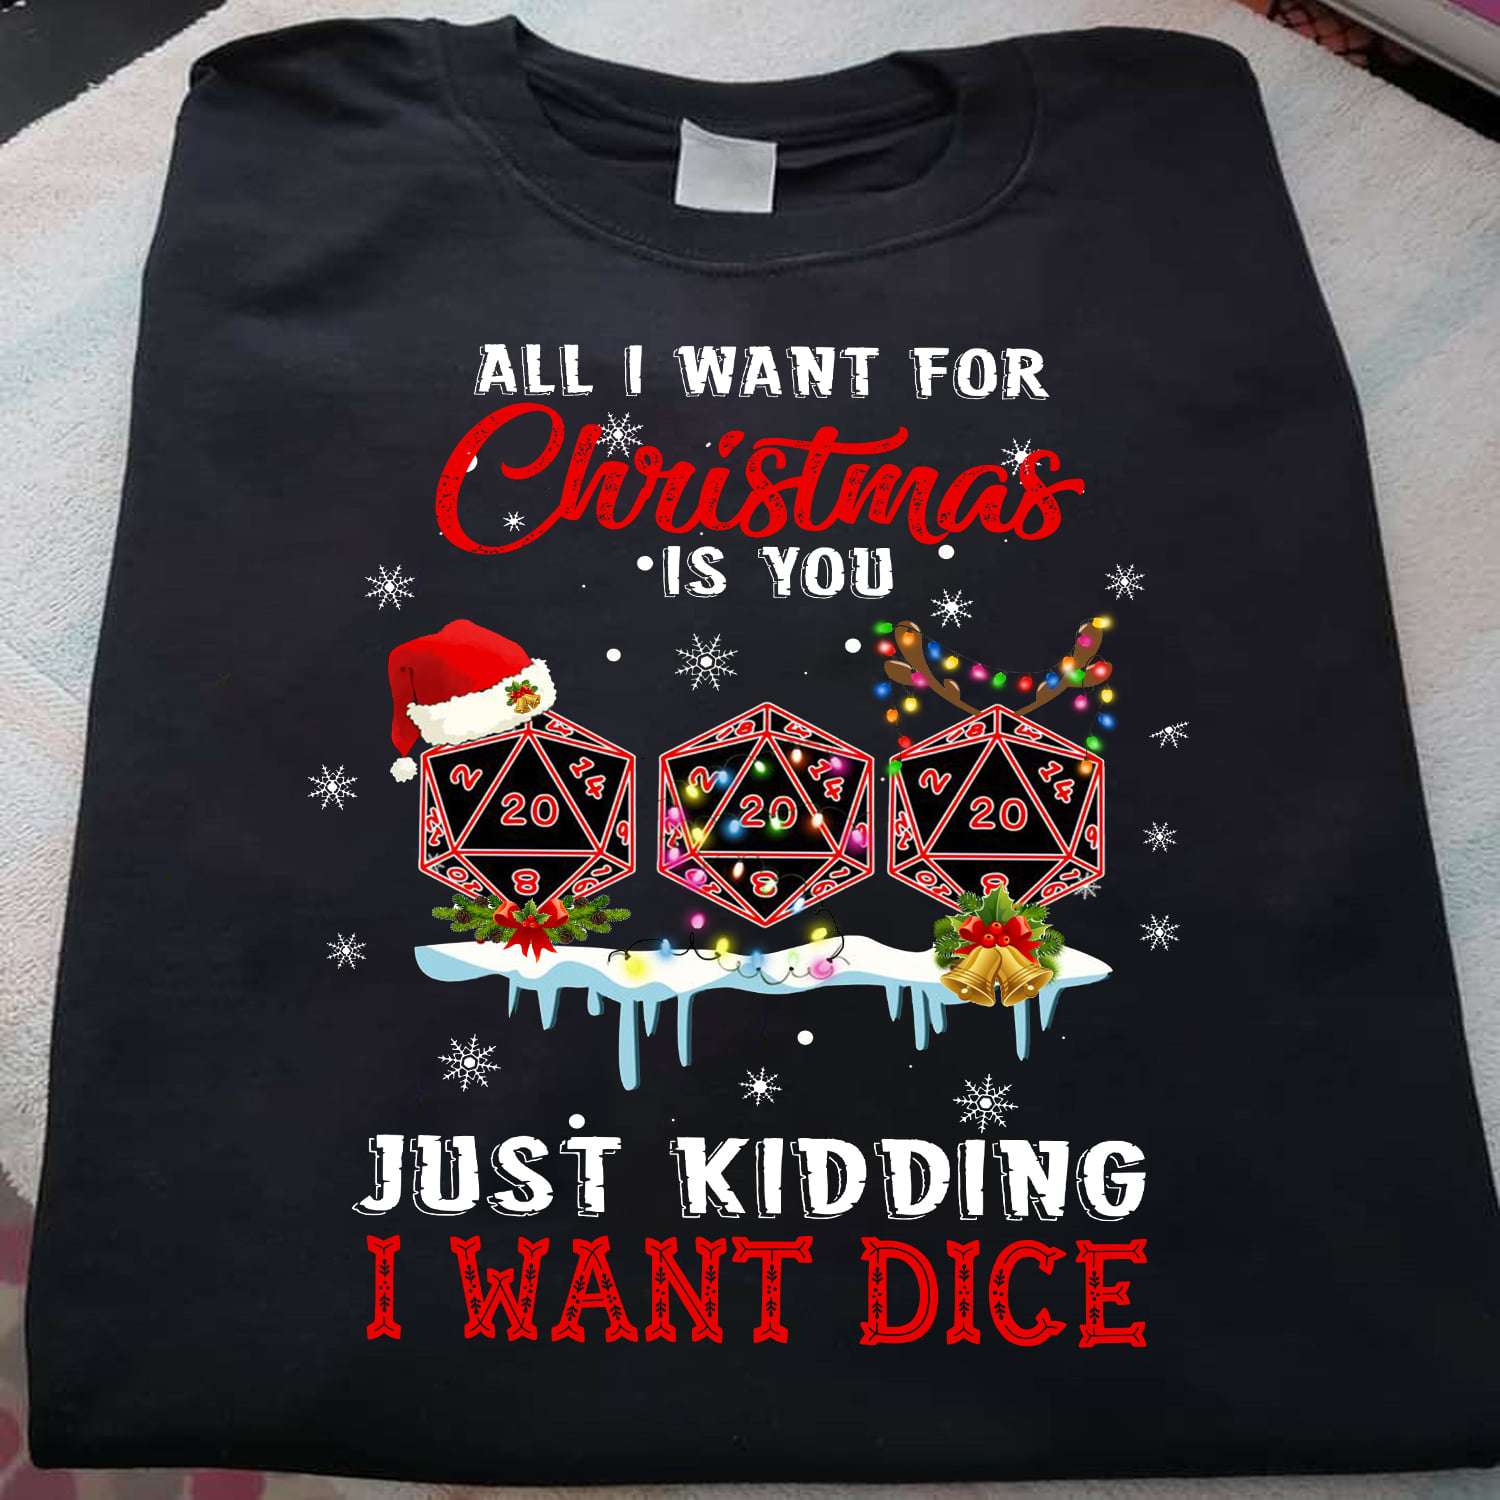 All I want for Christmas is you, just kidding I want dice - Dragons and Dungeons, Christmas day gift